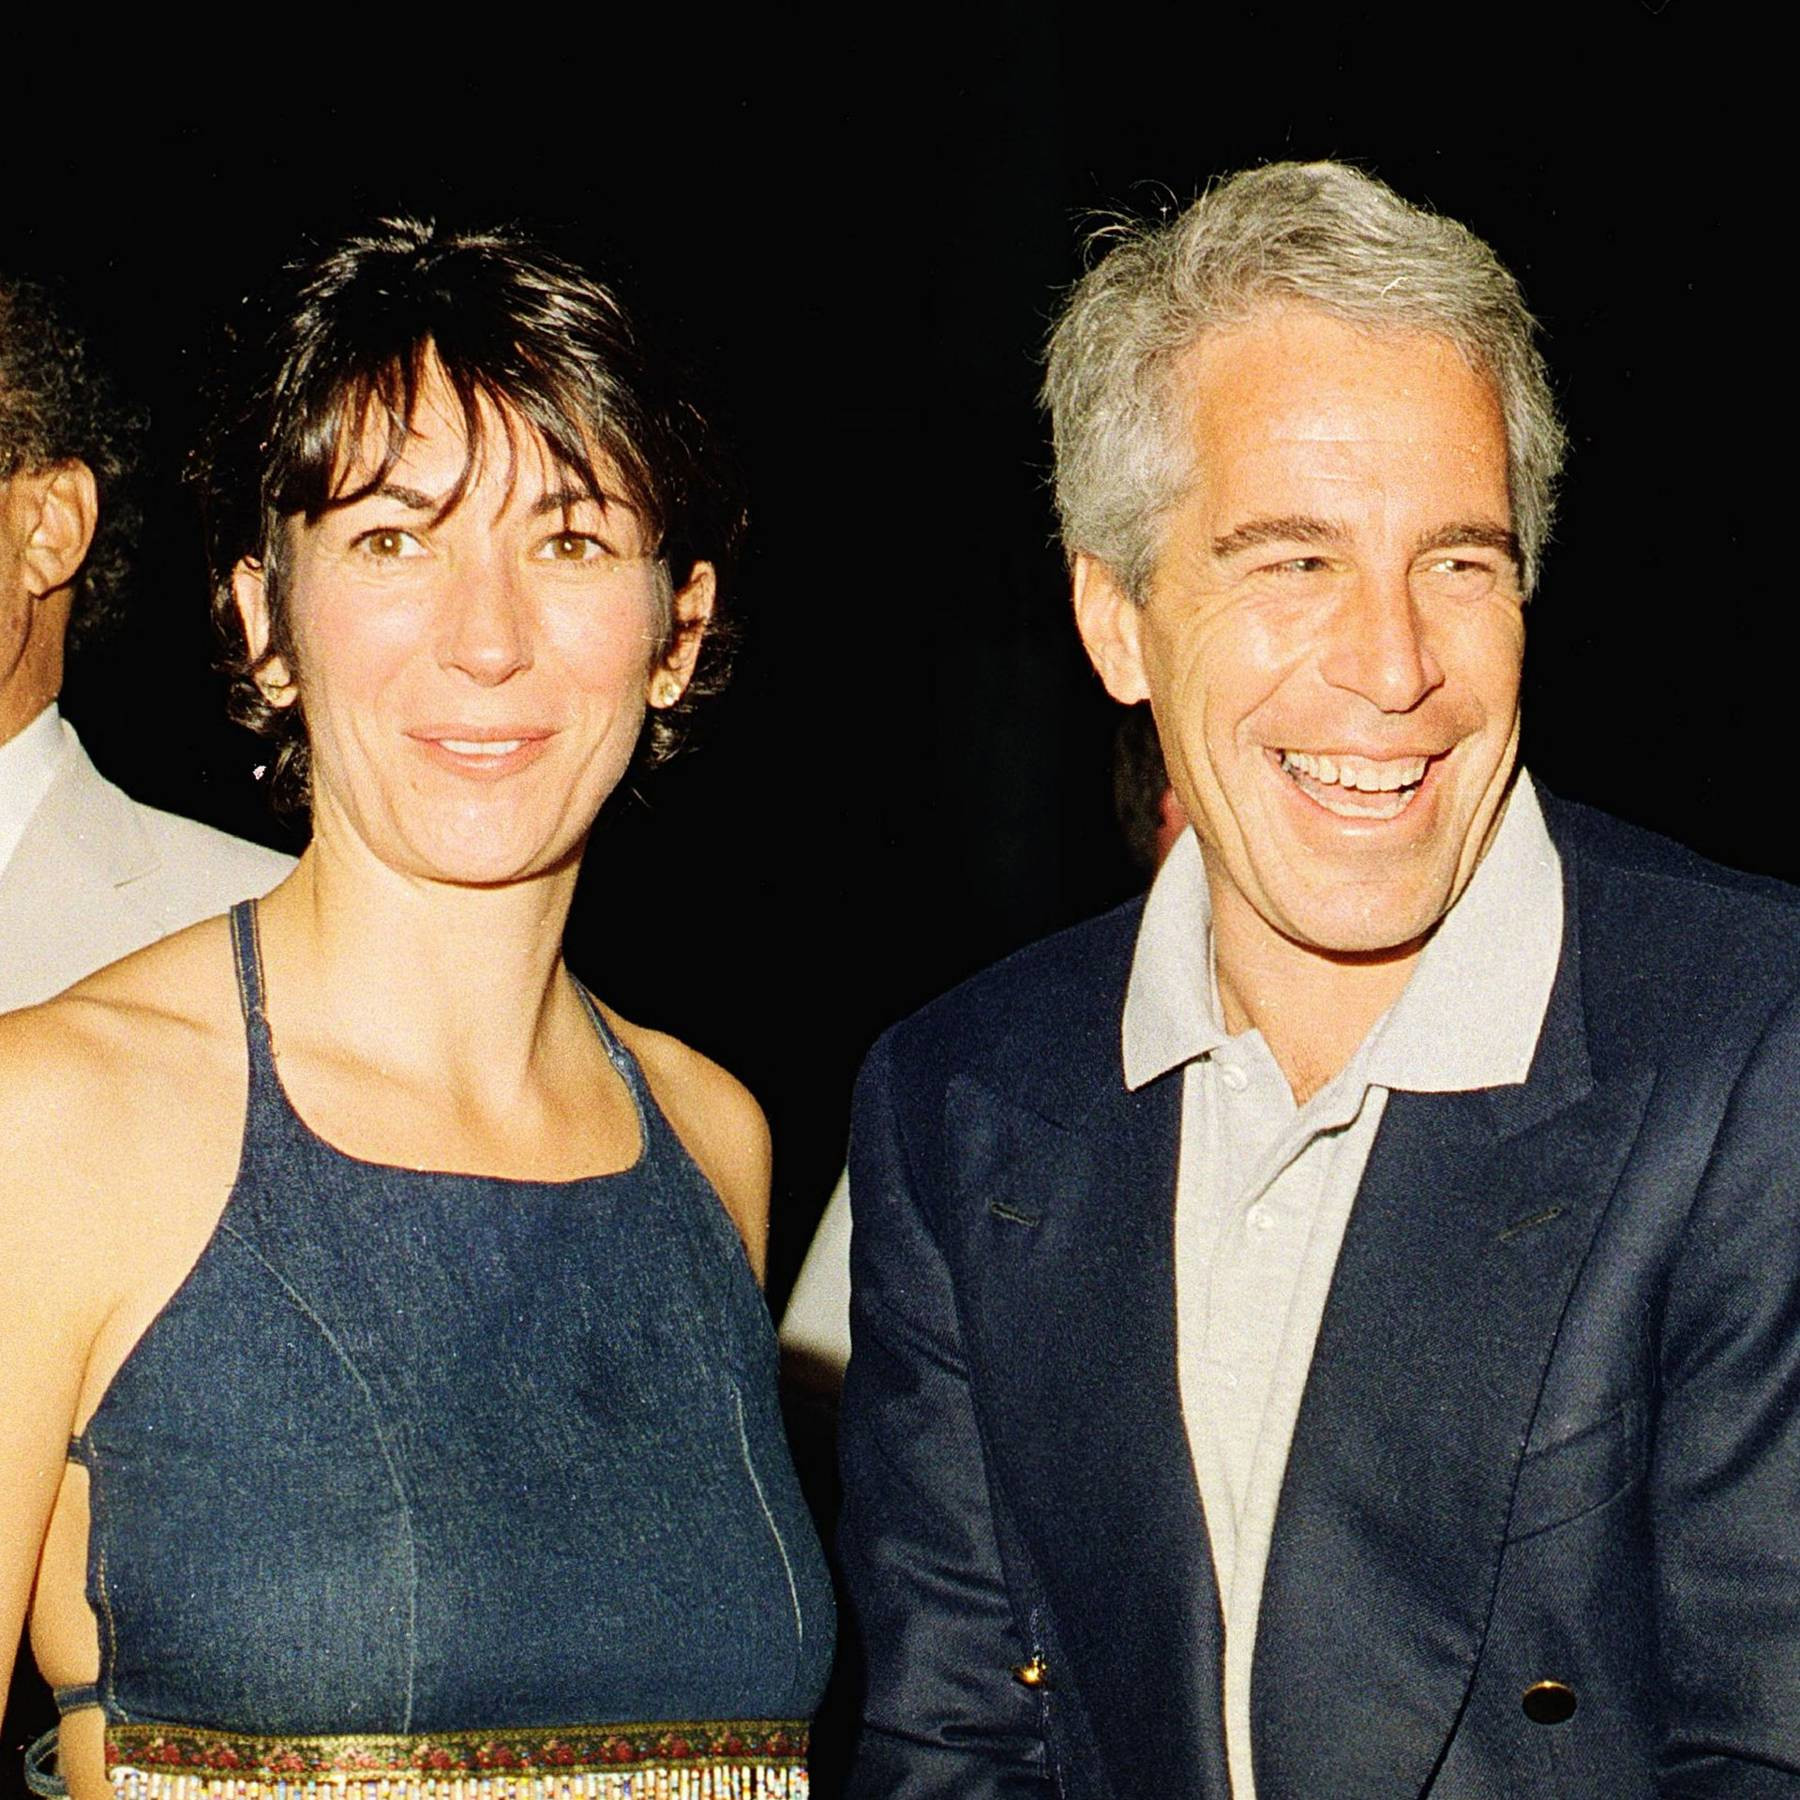 Ghislaine Maxwell and Jeffrey Epstein's relationship: What to know - F...